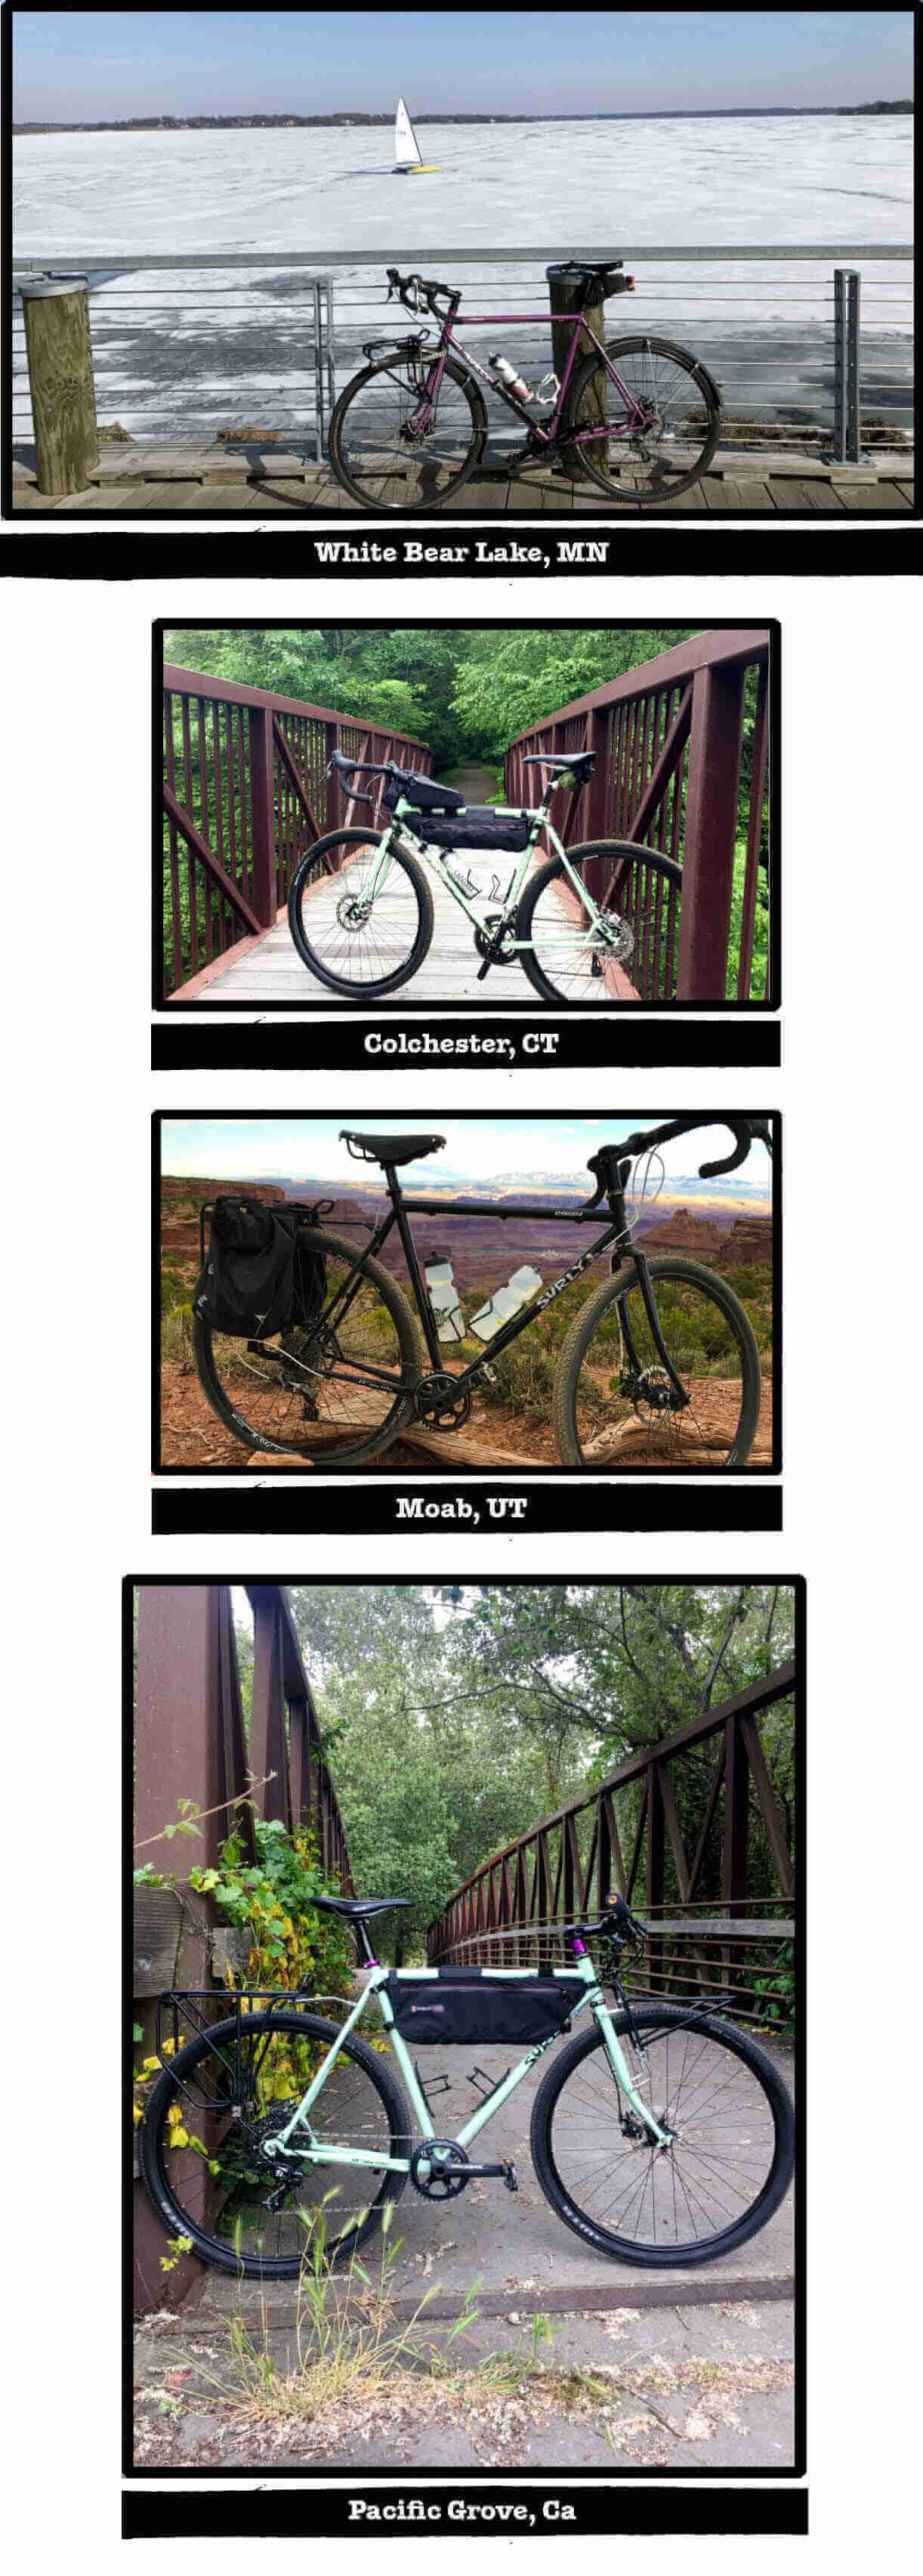 Multiple images of Surly Straggler bikes, with tags of their specific location listed below each image